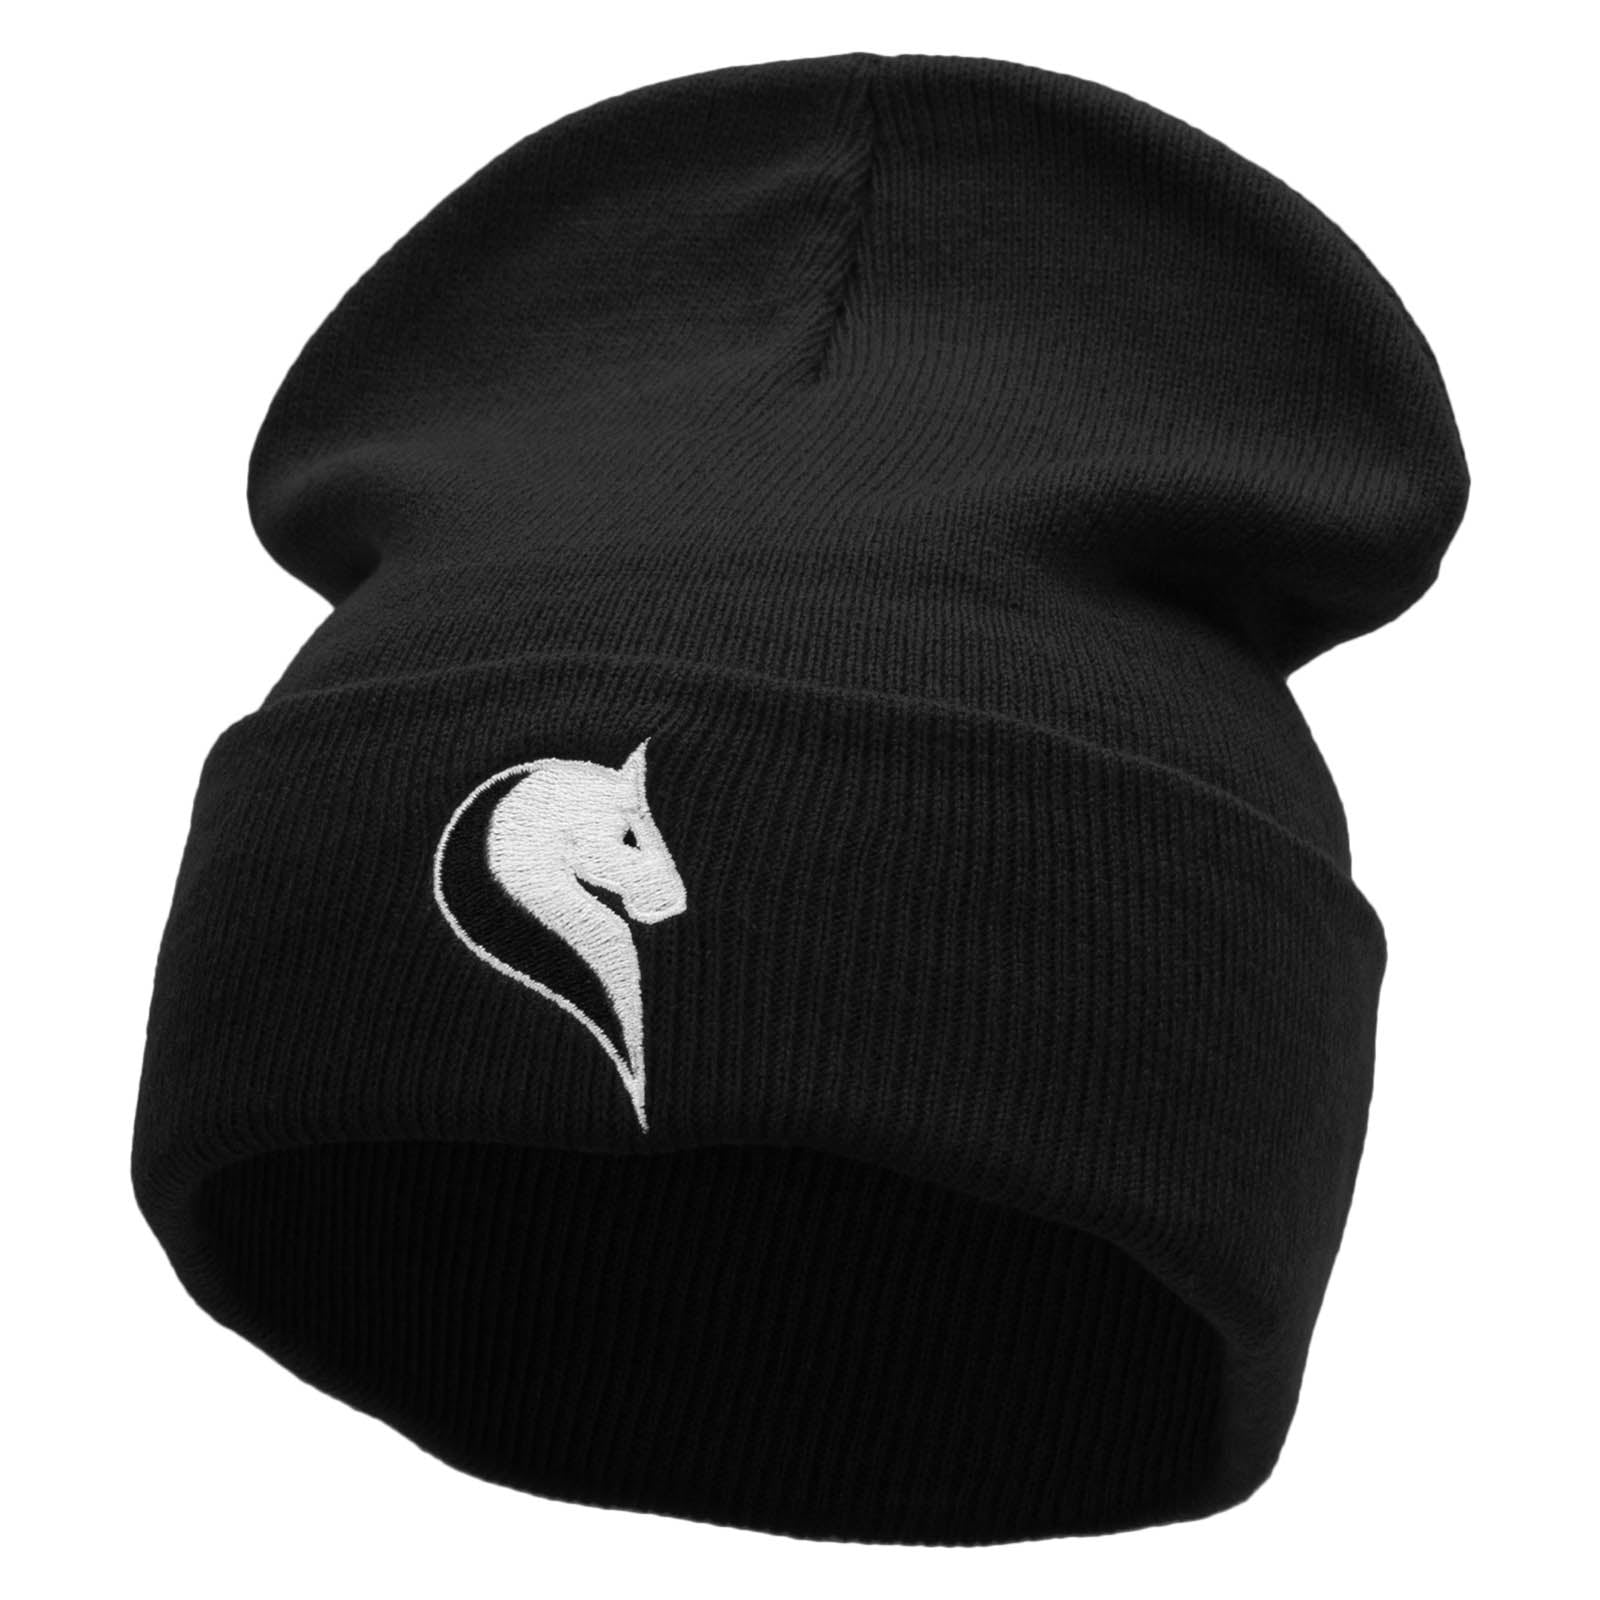 Horse Symbol Embroidered 12 Inch Long Knitted Beanie - Black OSFM